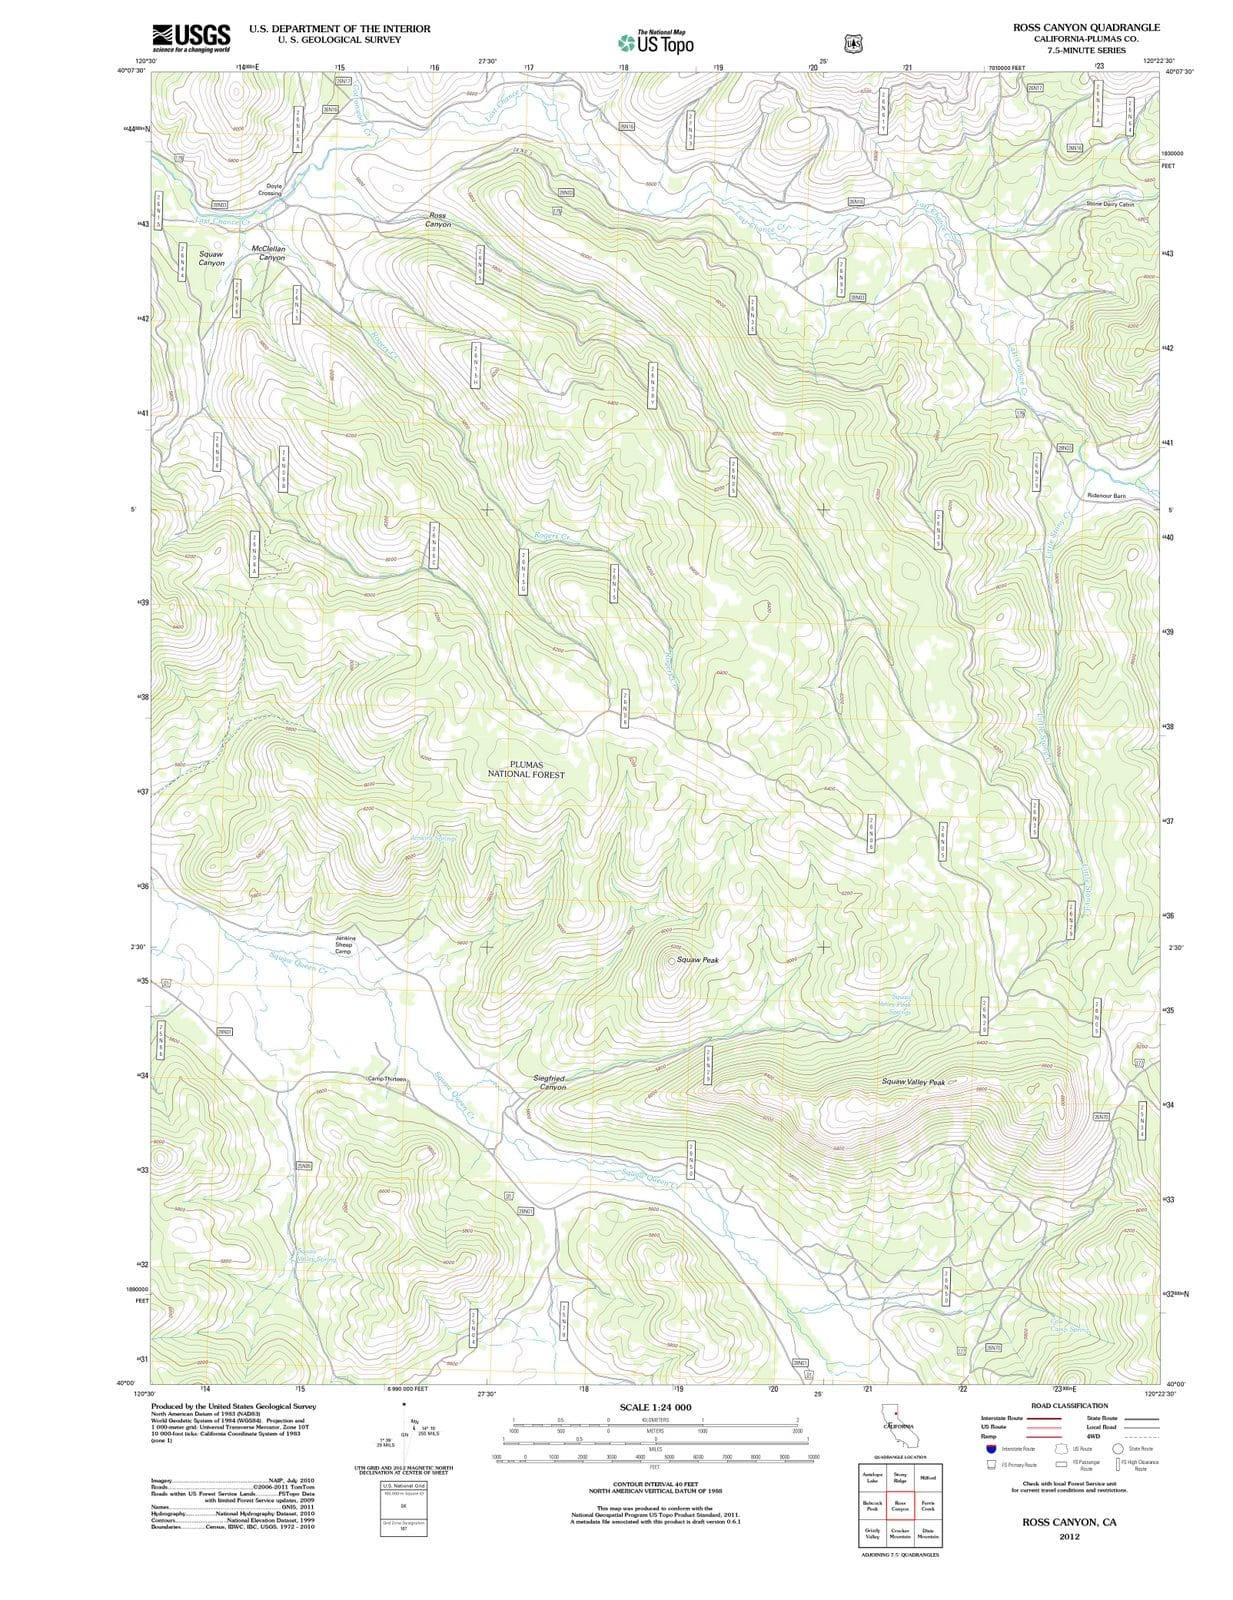 2012 Ross Canyon, CA - California - USGS Topographic Map